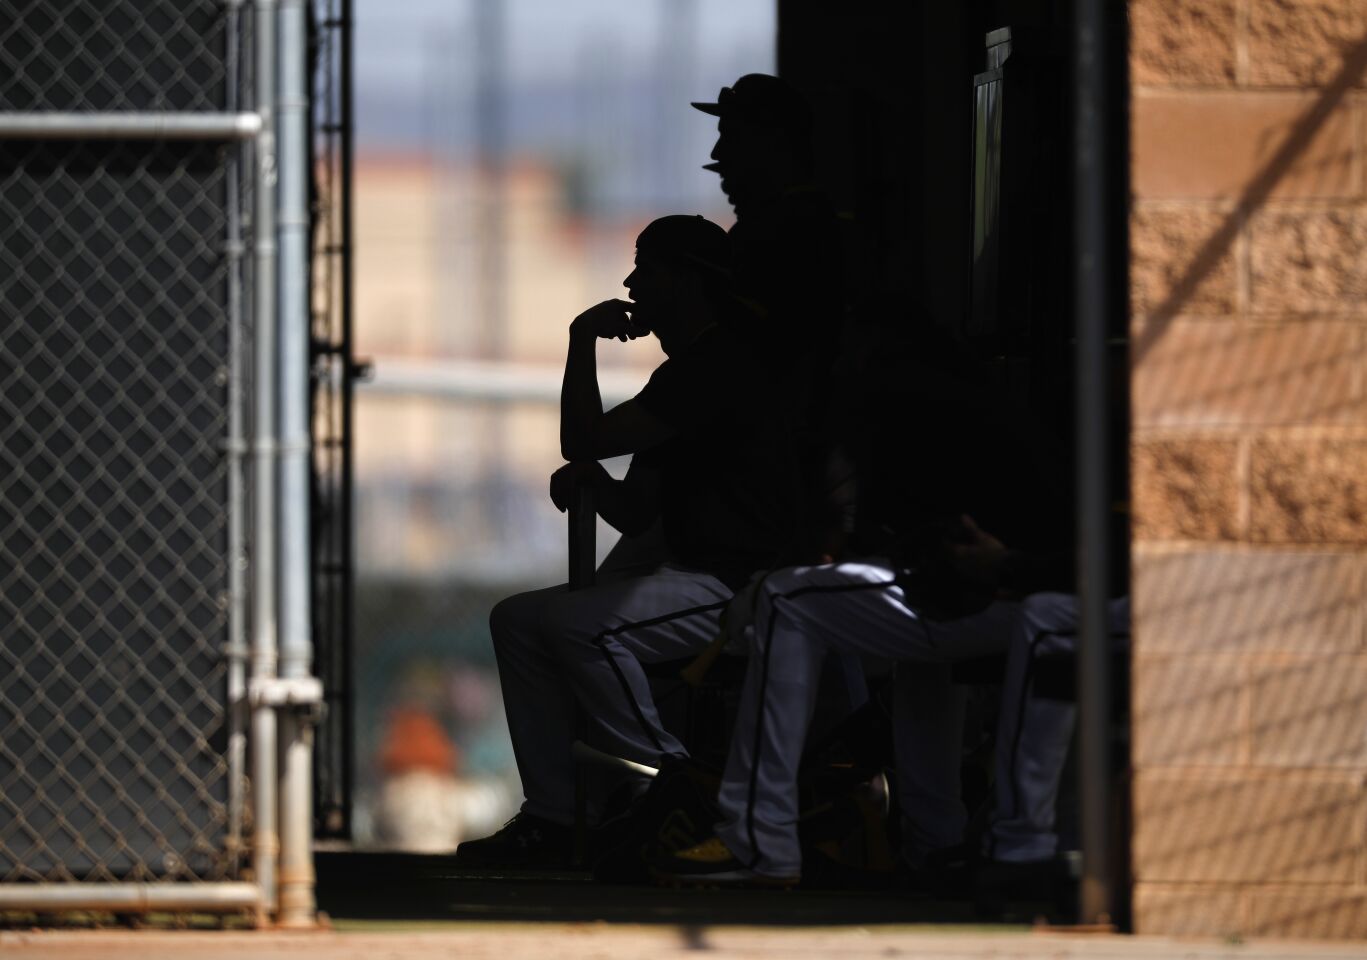 San Diego Padres Wil Myers waits to bat in the cages during a spring training practice on Feb. 18, 2020.